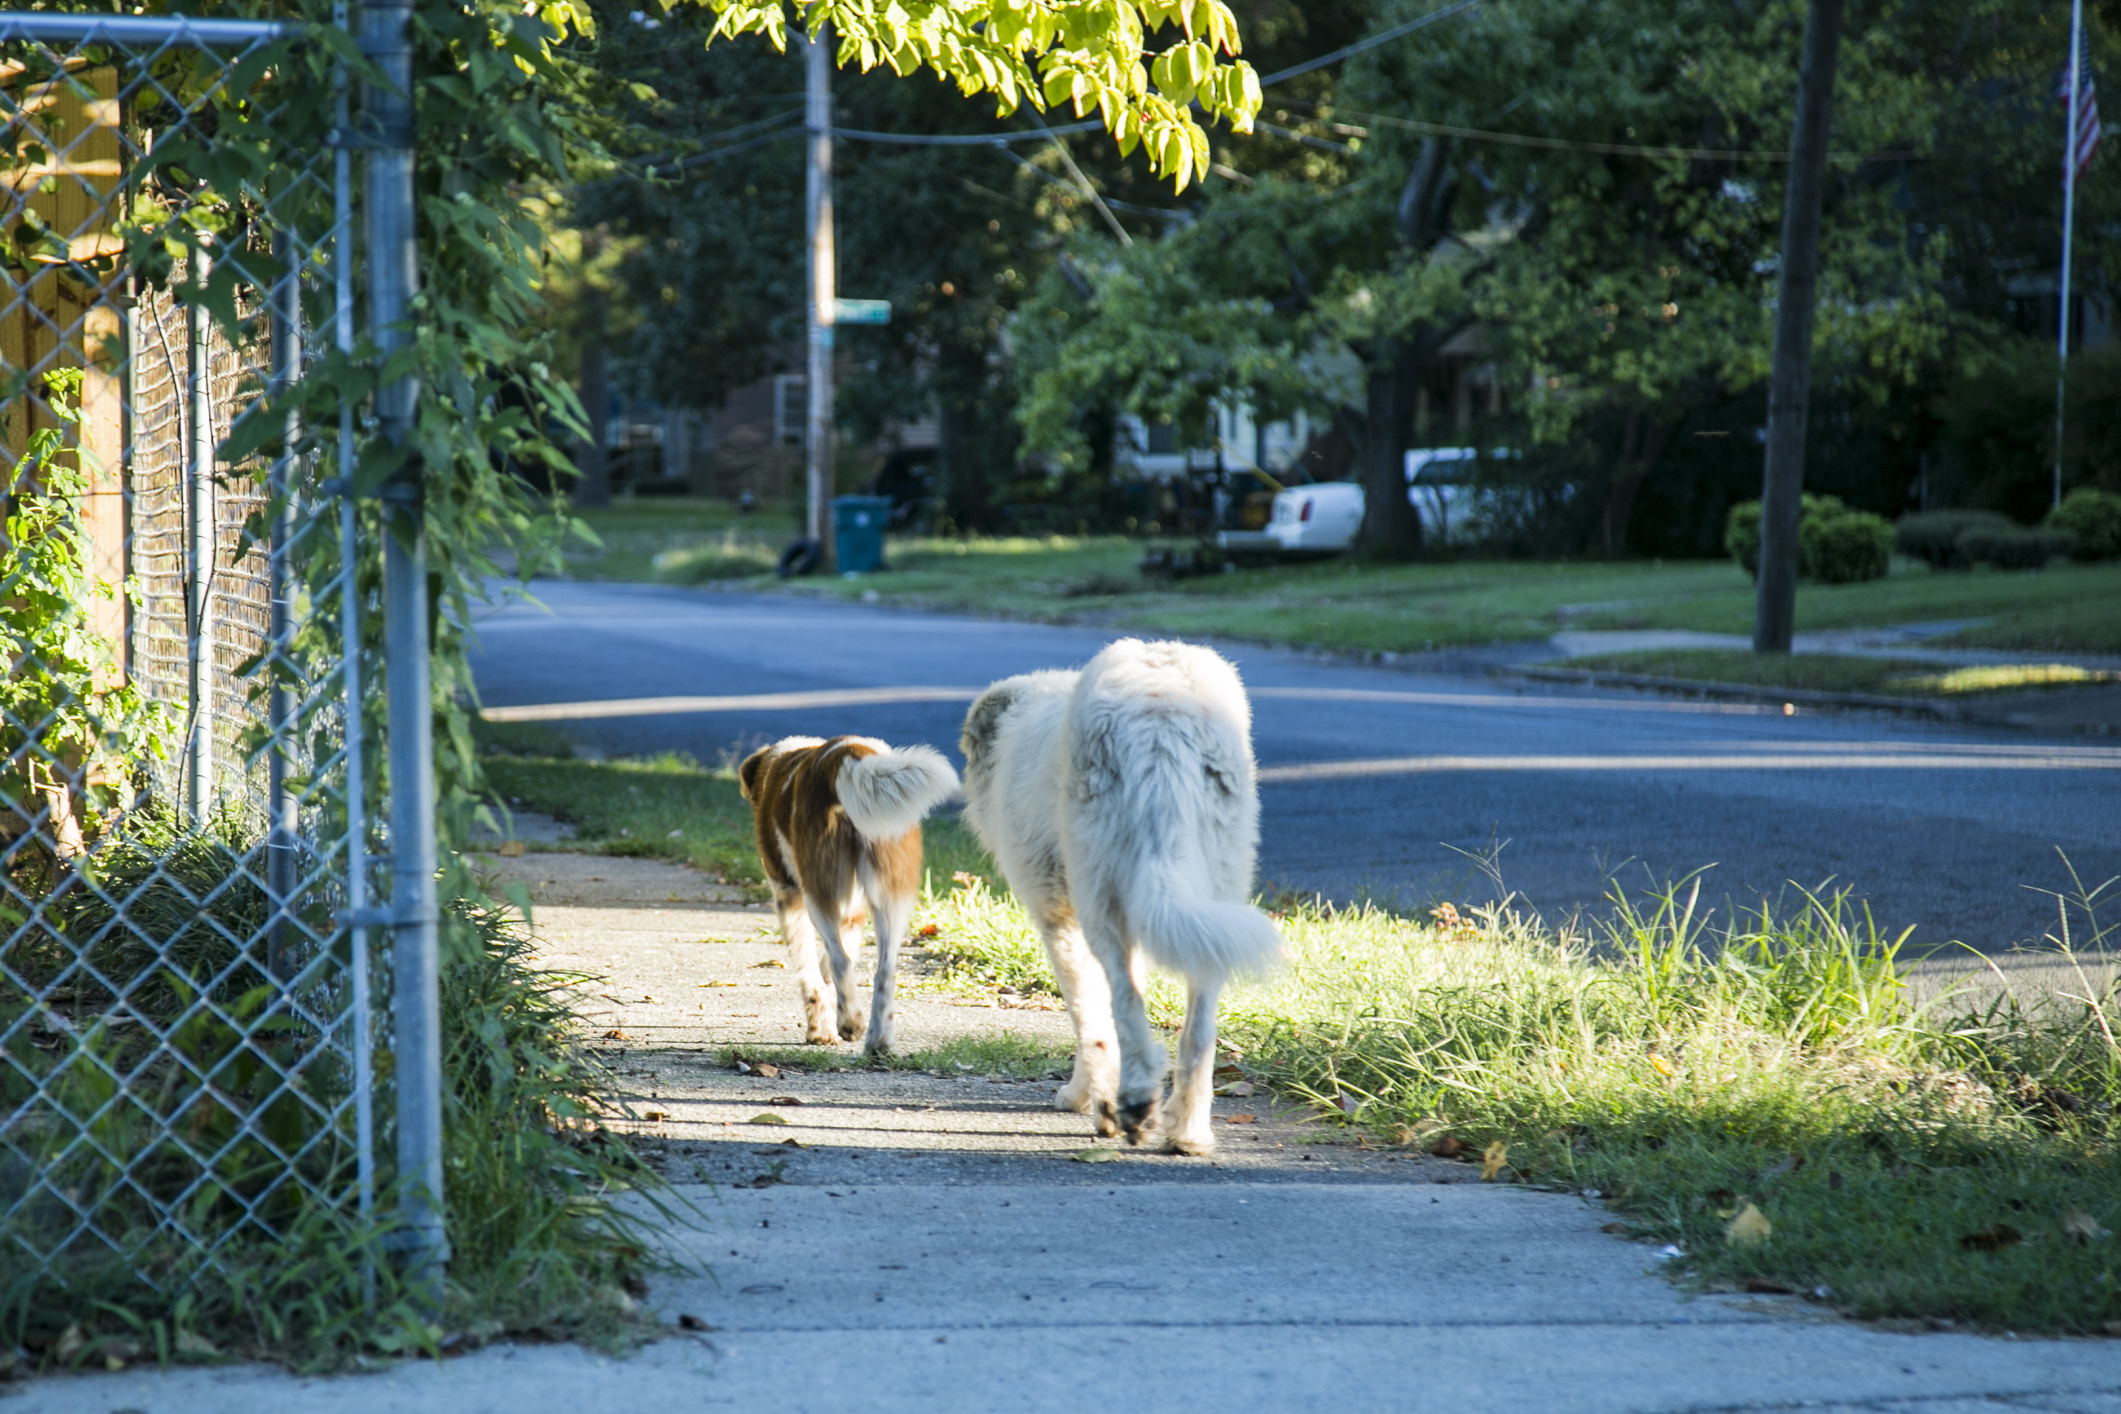 Stray dogs walk through The Heights. Strays are a symptom of the 1,100 vacant properties in area. (Natalie Eddings)